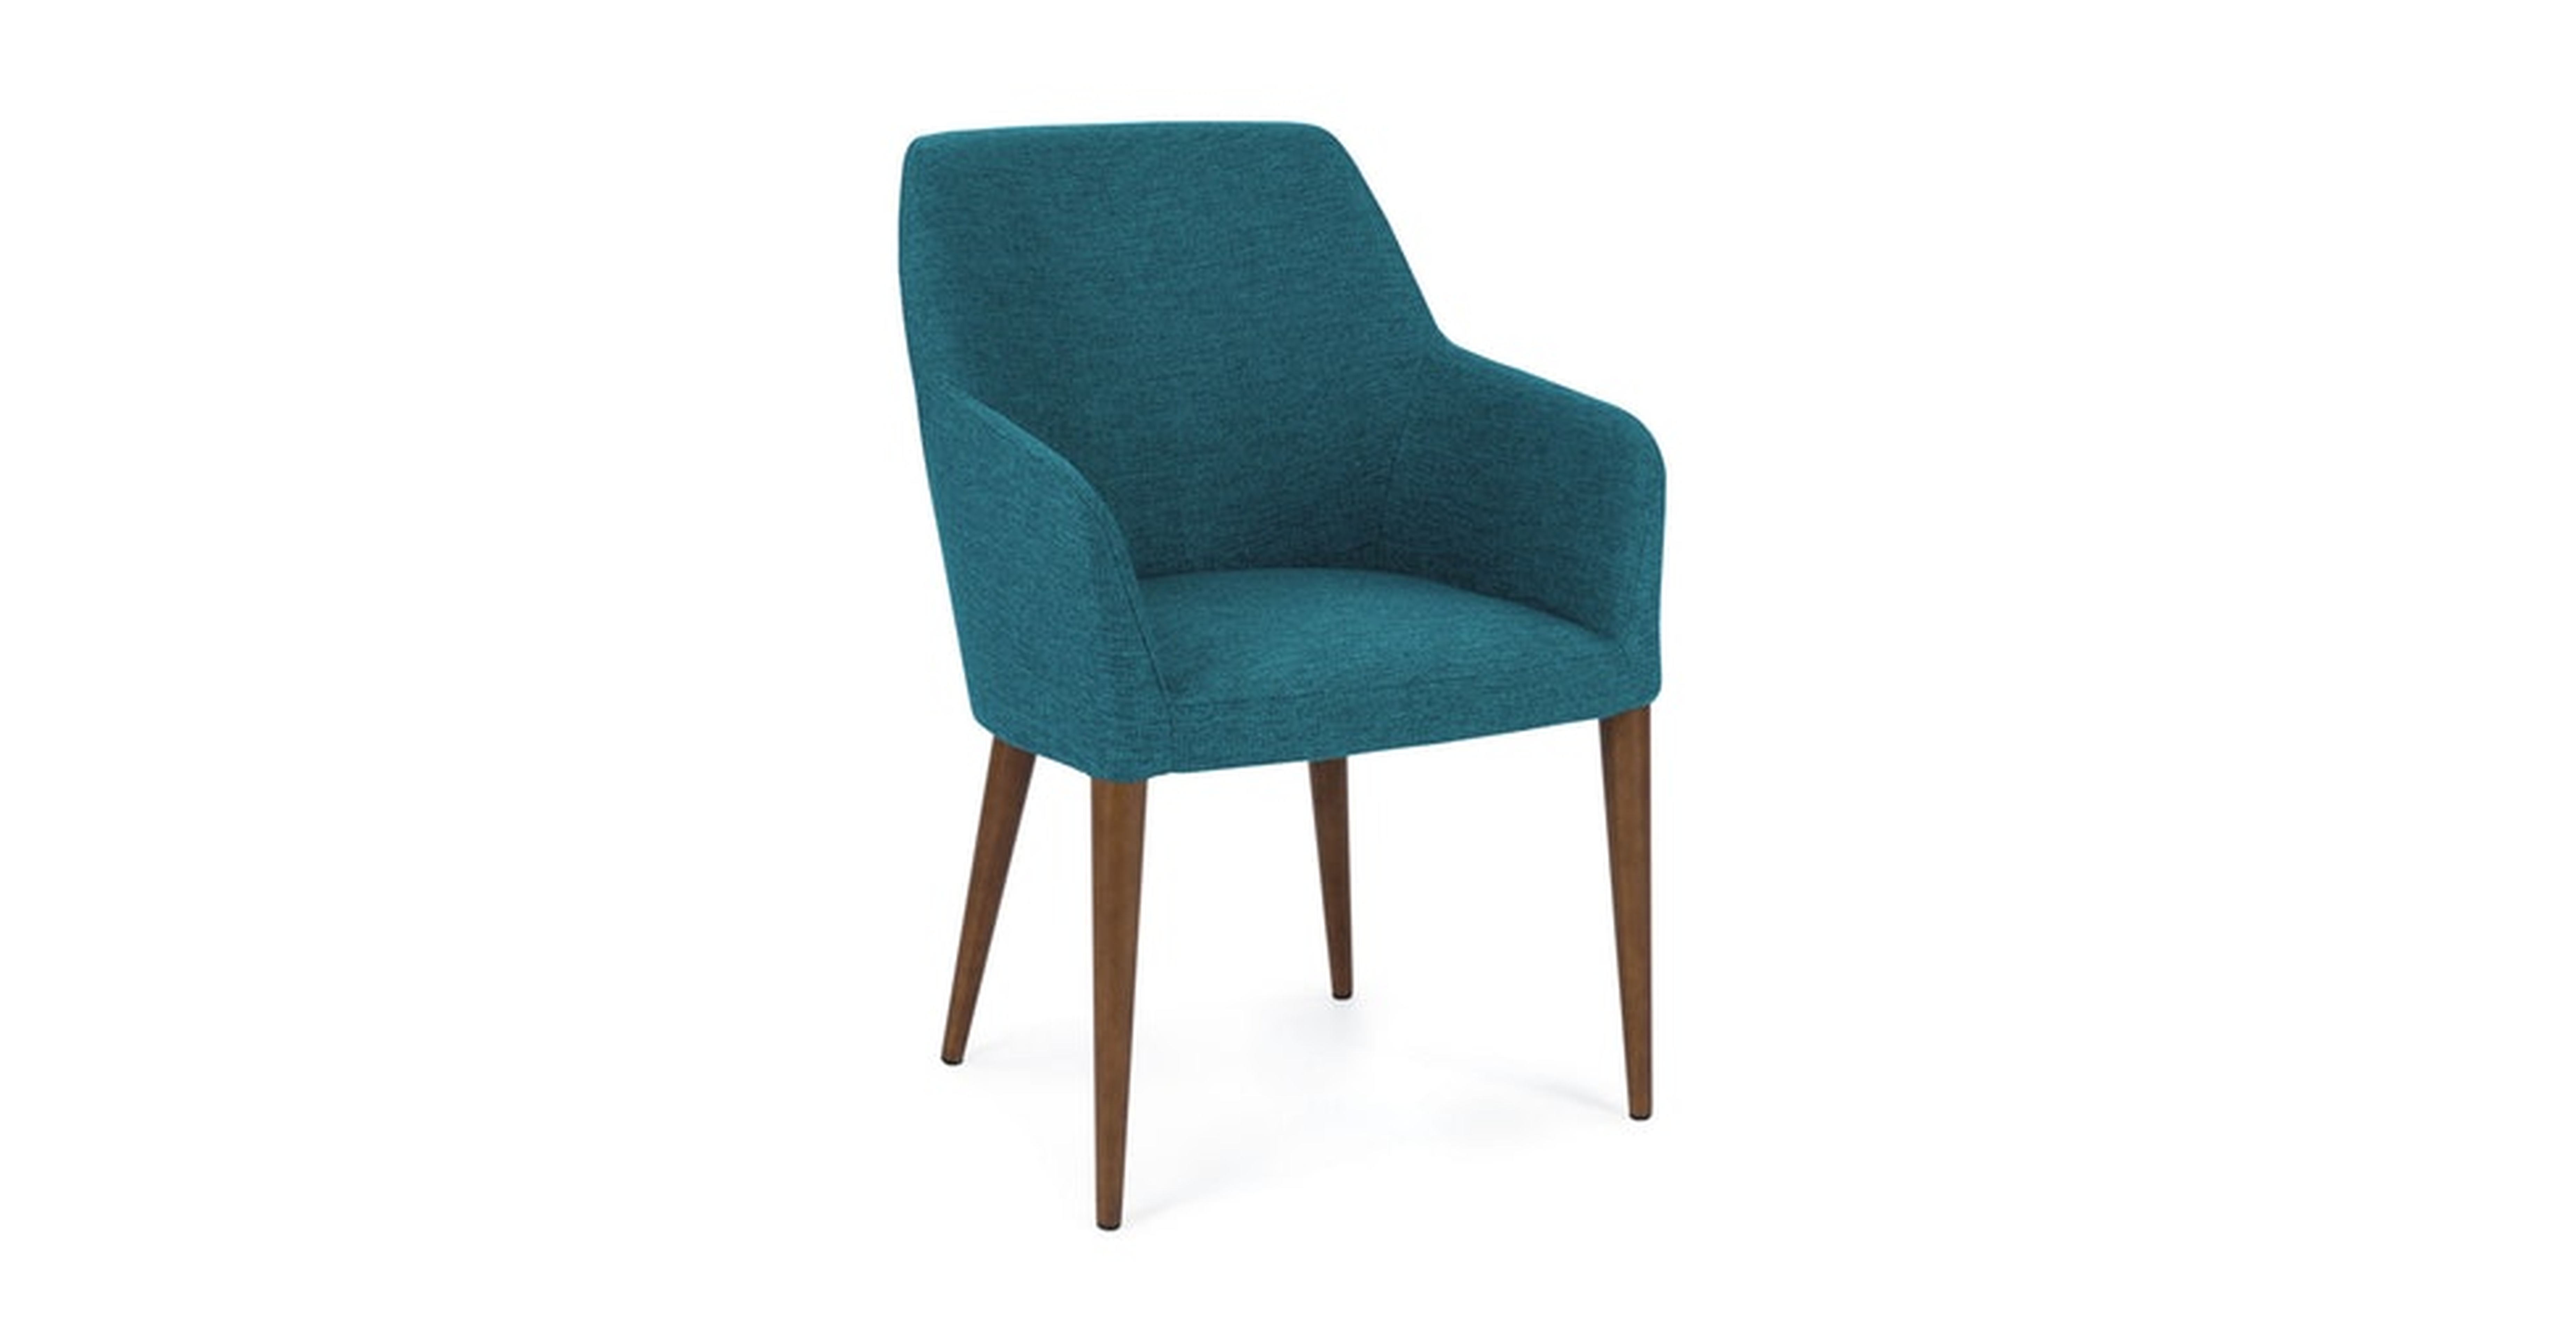 Feast Arizona Turquoise Dining Chair - Article